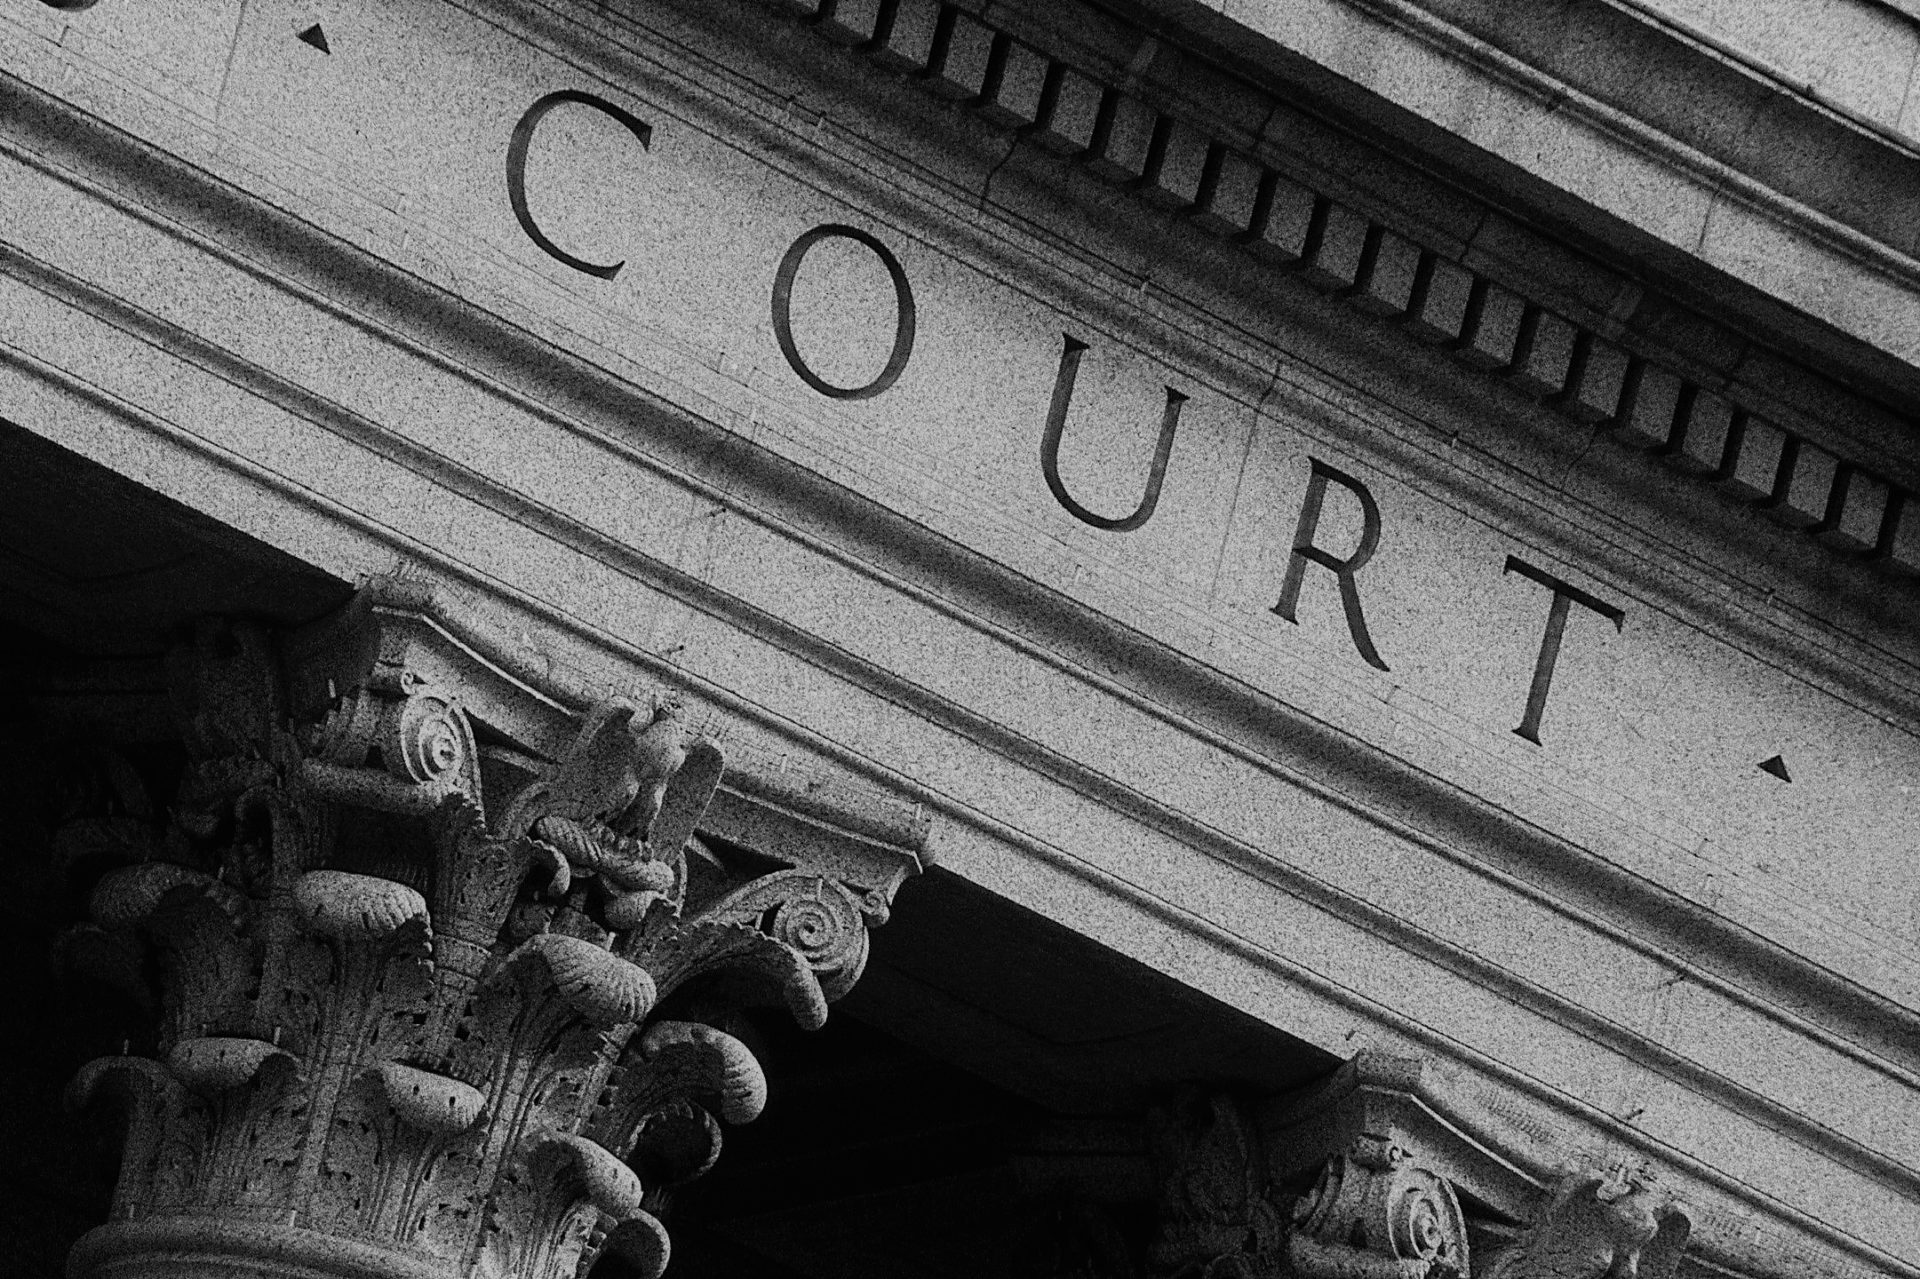 A close up of the front entrance to a court house.